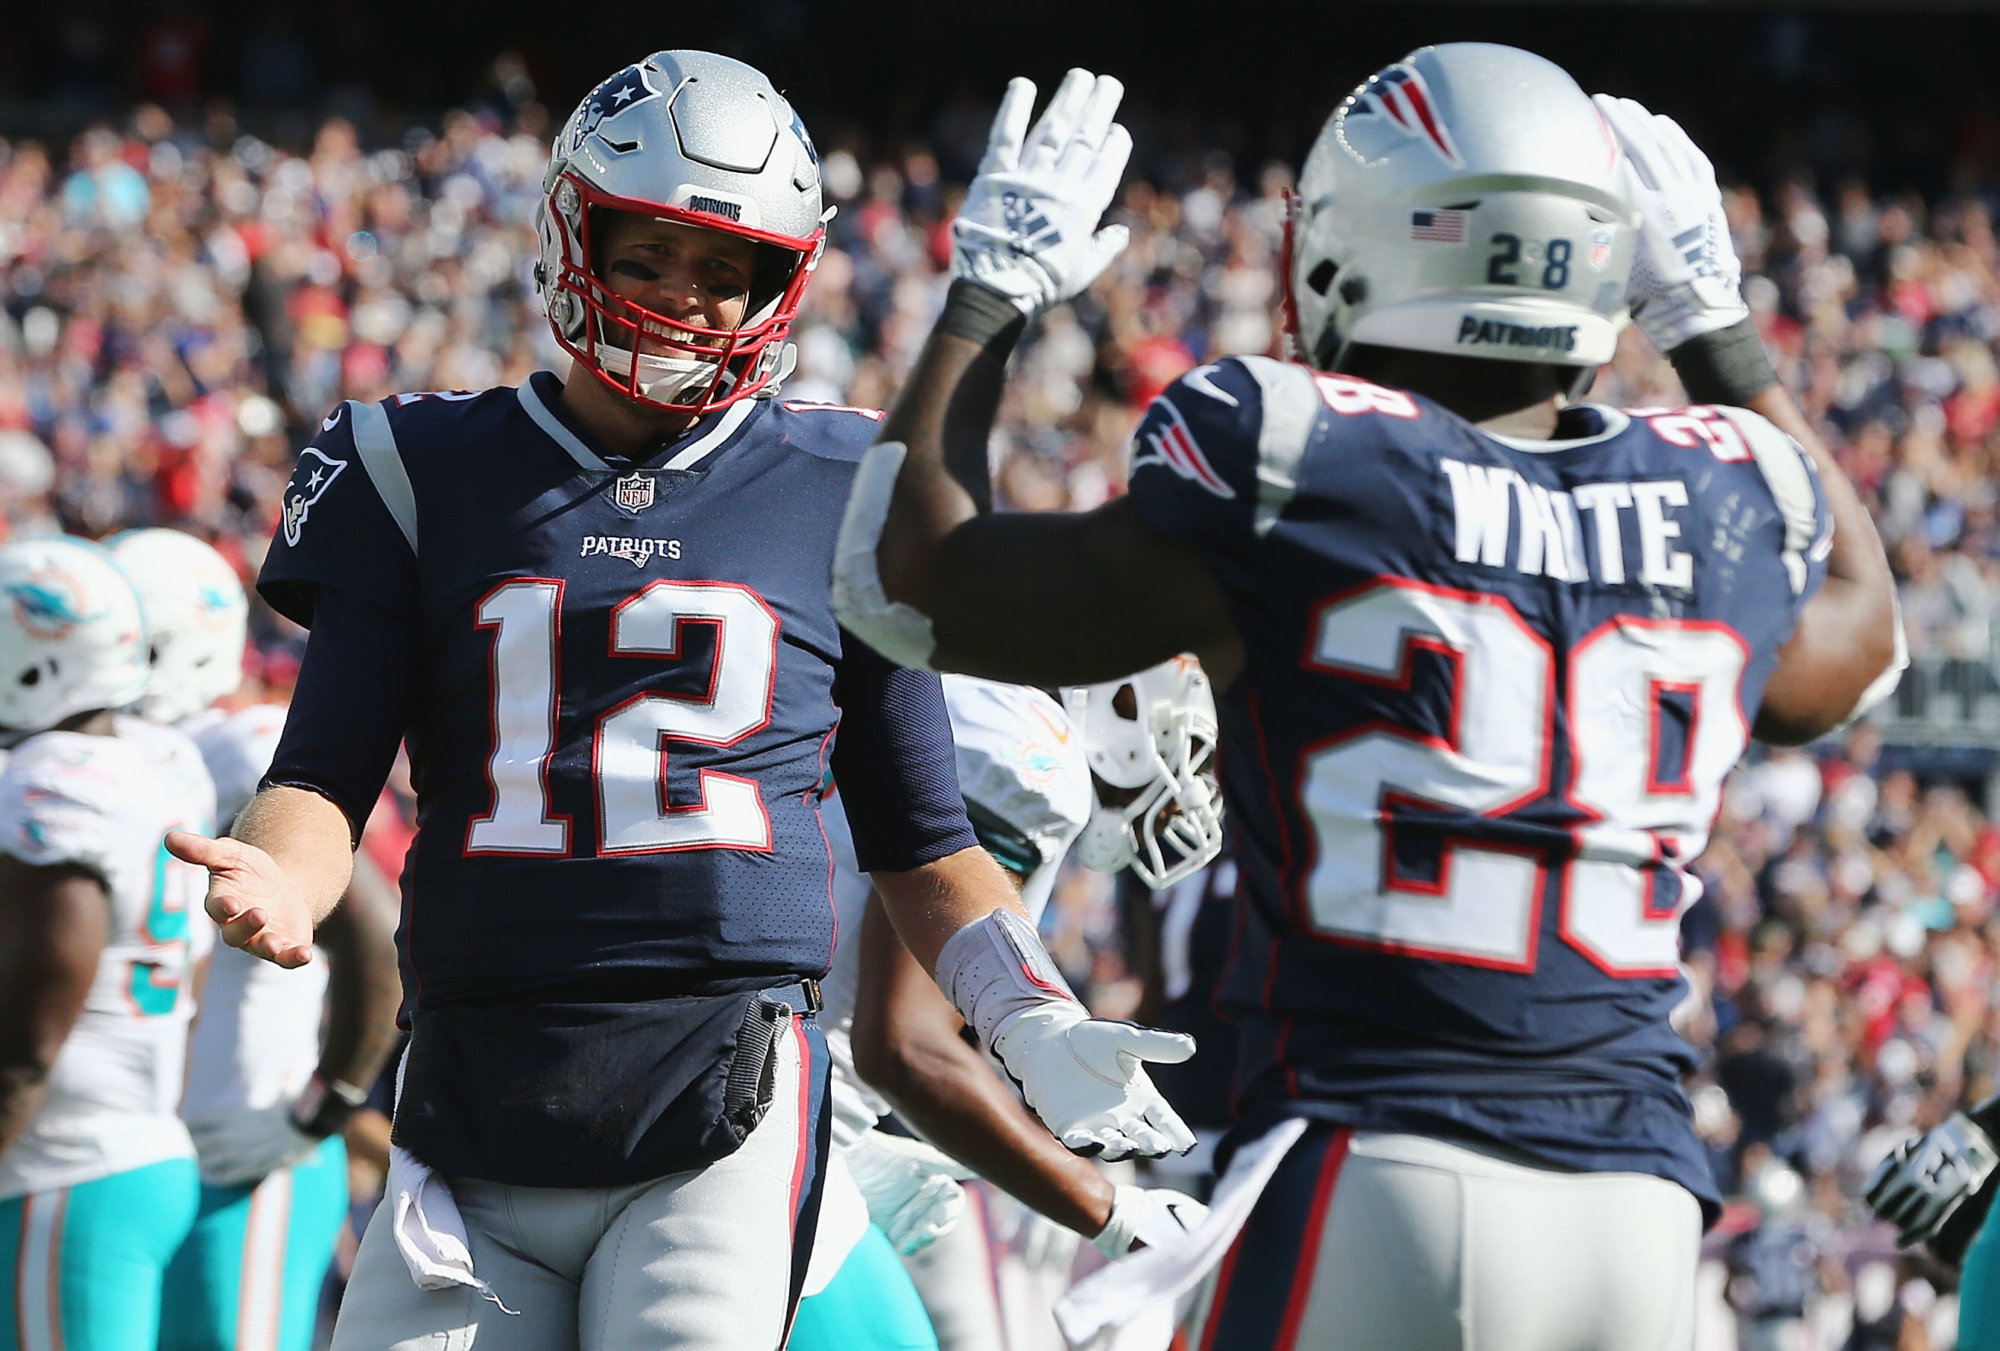 FOXBOROUGH, MA - SEPTEMBER 30:  Tom Brady #12 celebrates with James White #28 of the New England Patriots after scoring a touchdown during the third quarter against the Miami Dolphins at Gillette Stadium on September 30, 2018 in Foxborough, Massachusetts.  (Photo by Jim Rogash/Getty Images)